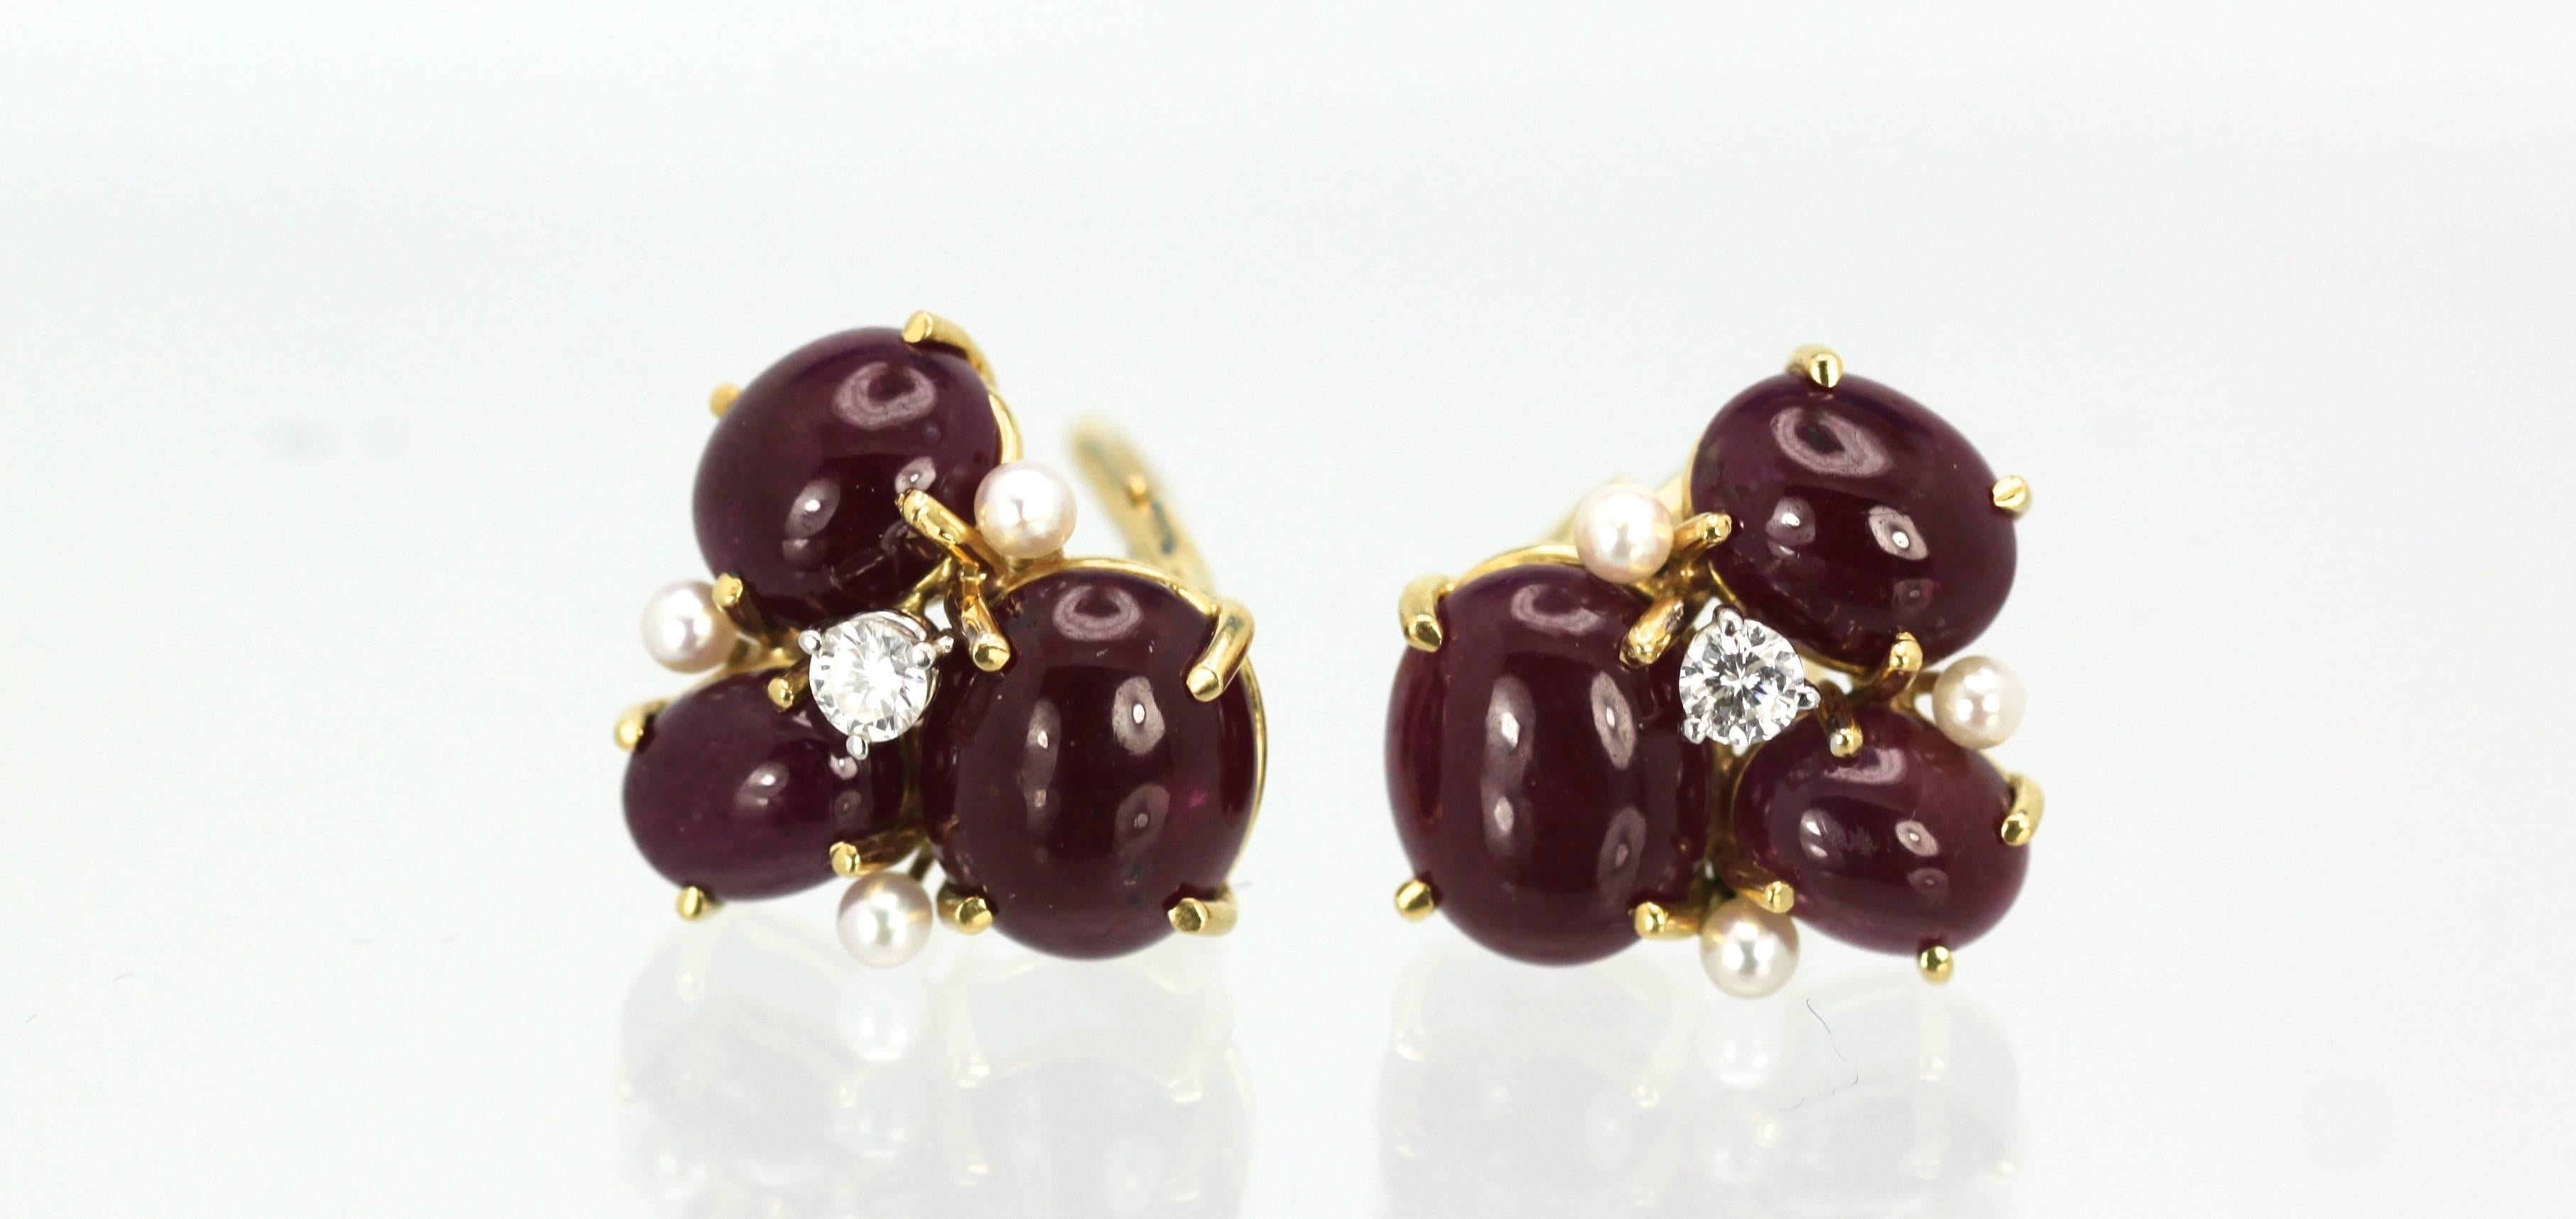 Gorgeous Seaman Schepps iconic cluster earrings in ruby cabochons. These rubies are in excellent condition and weigh approx. 6.00 carats total for each earring. They are studded with (3) seed pearls and (1) 0.10 carat diamond on each earring. There